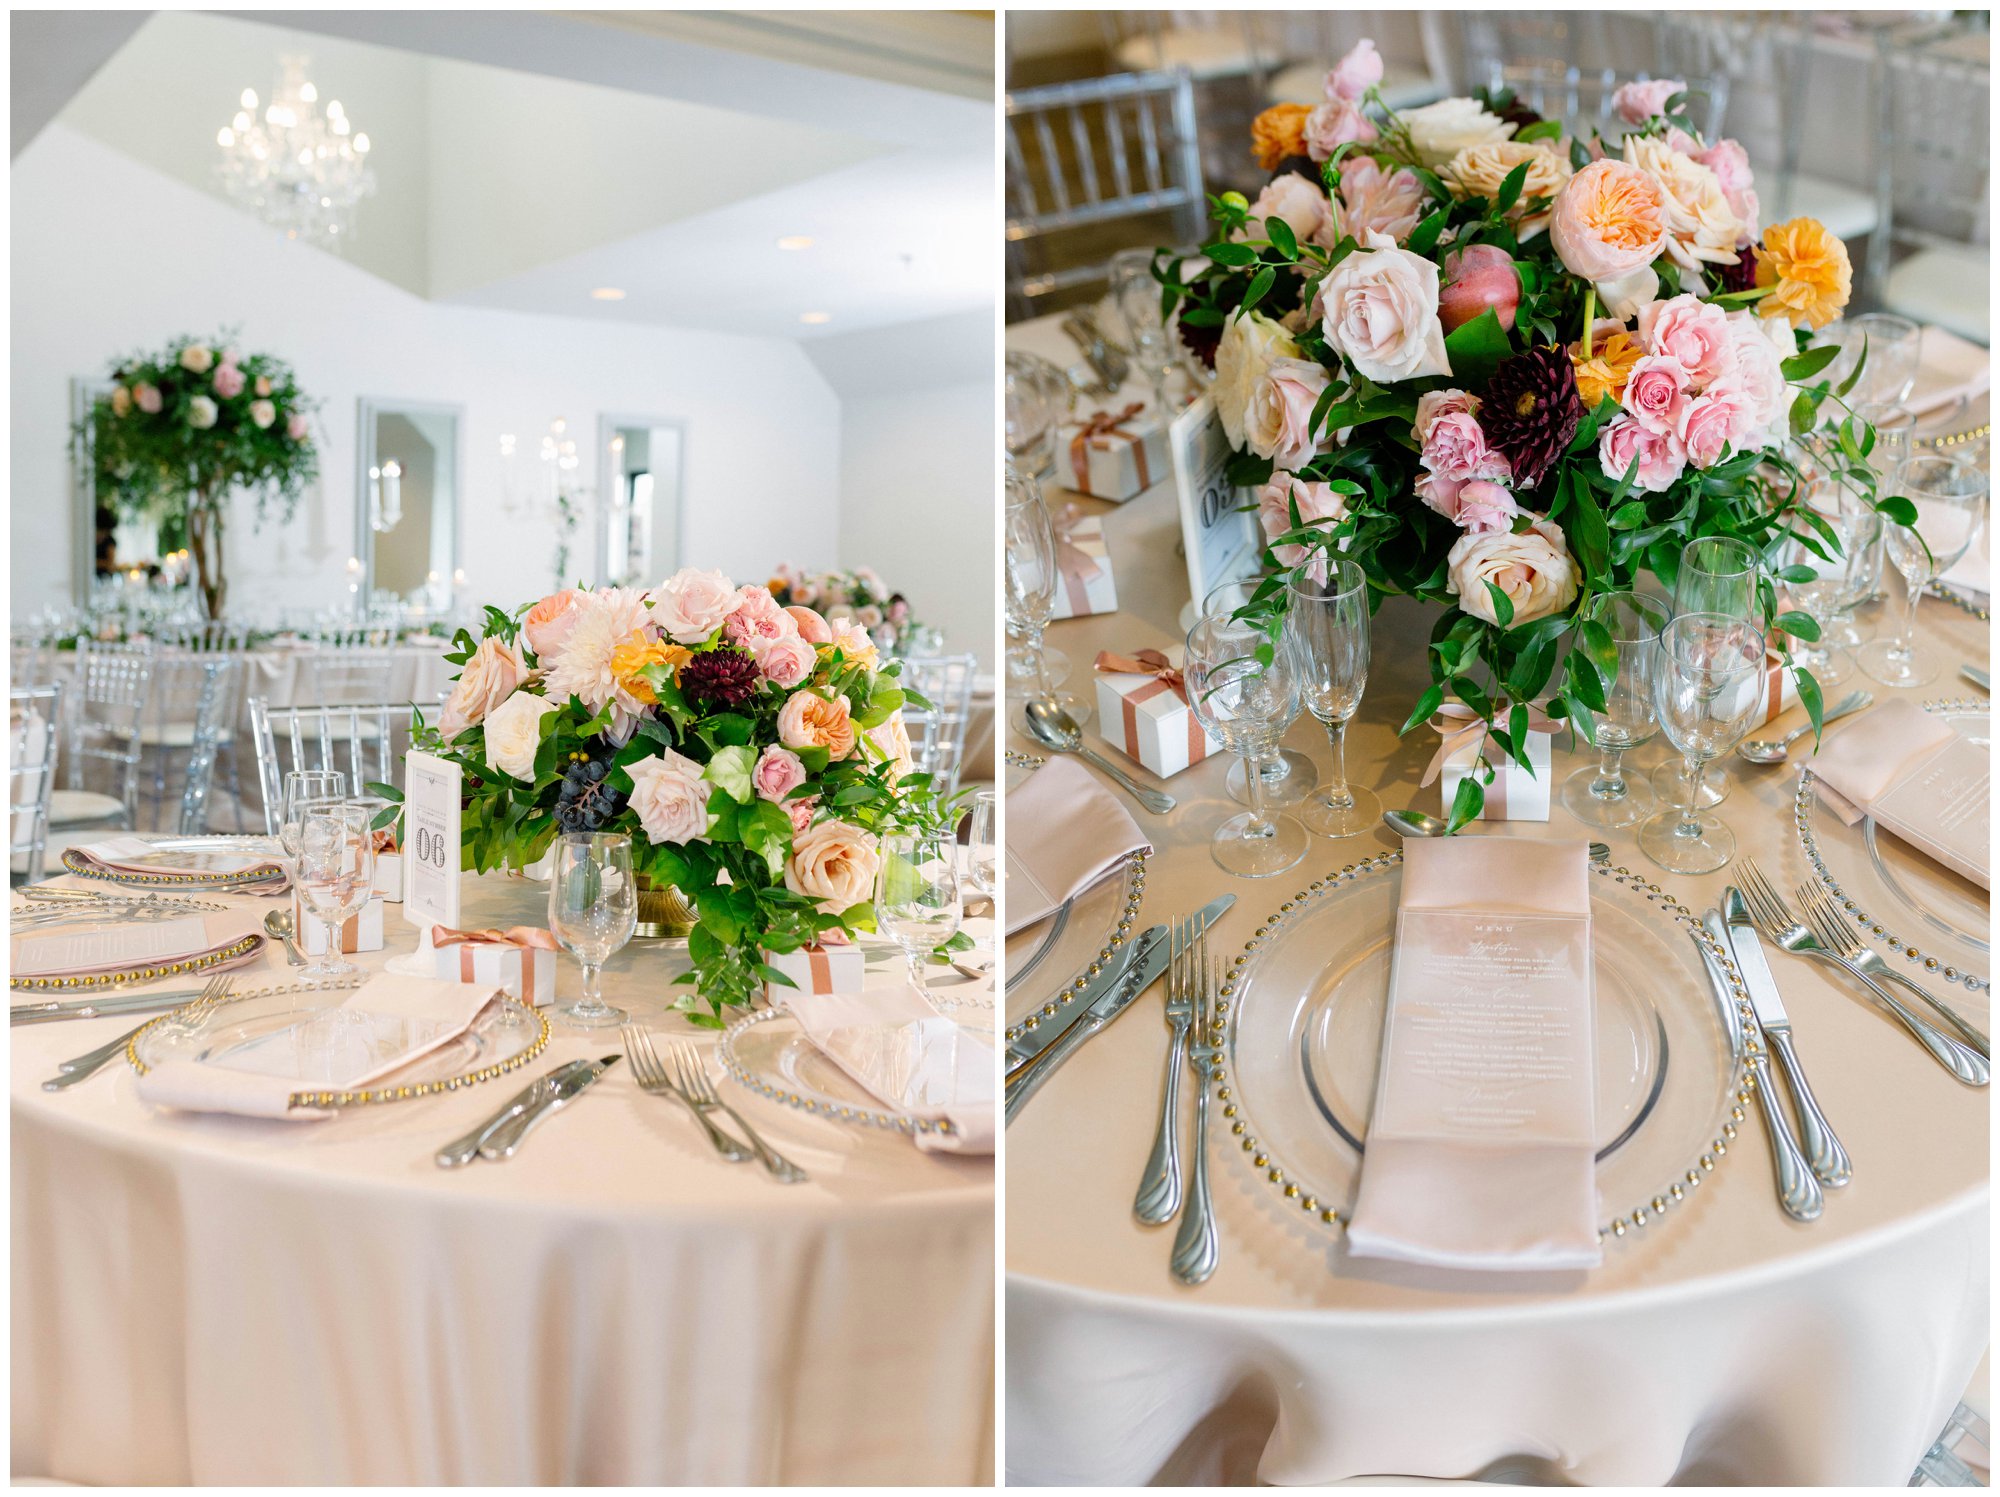 Wedding reception with pink floral centerpieces details at The Manor by Peter and Paul's